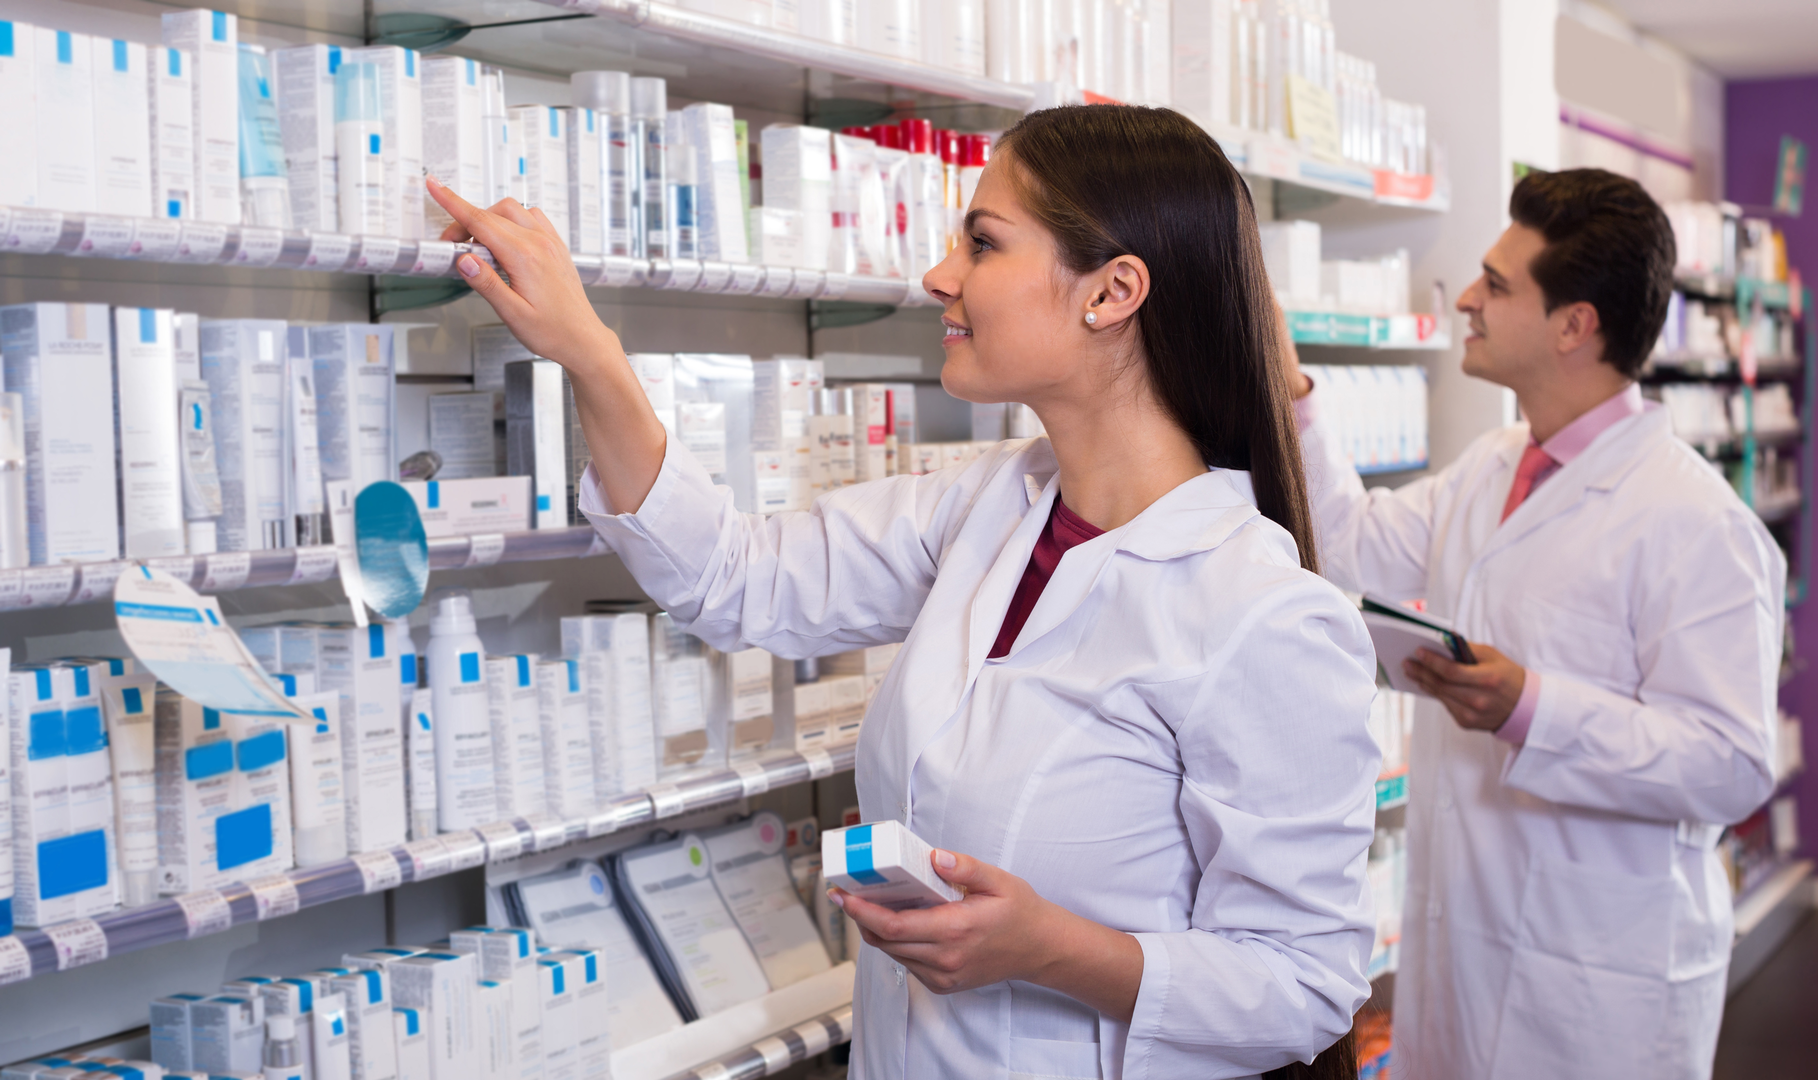 Two pharmacists filling prescriptions in a pharmacy